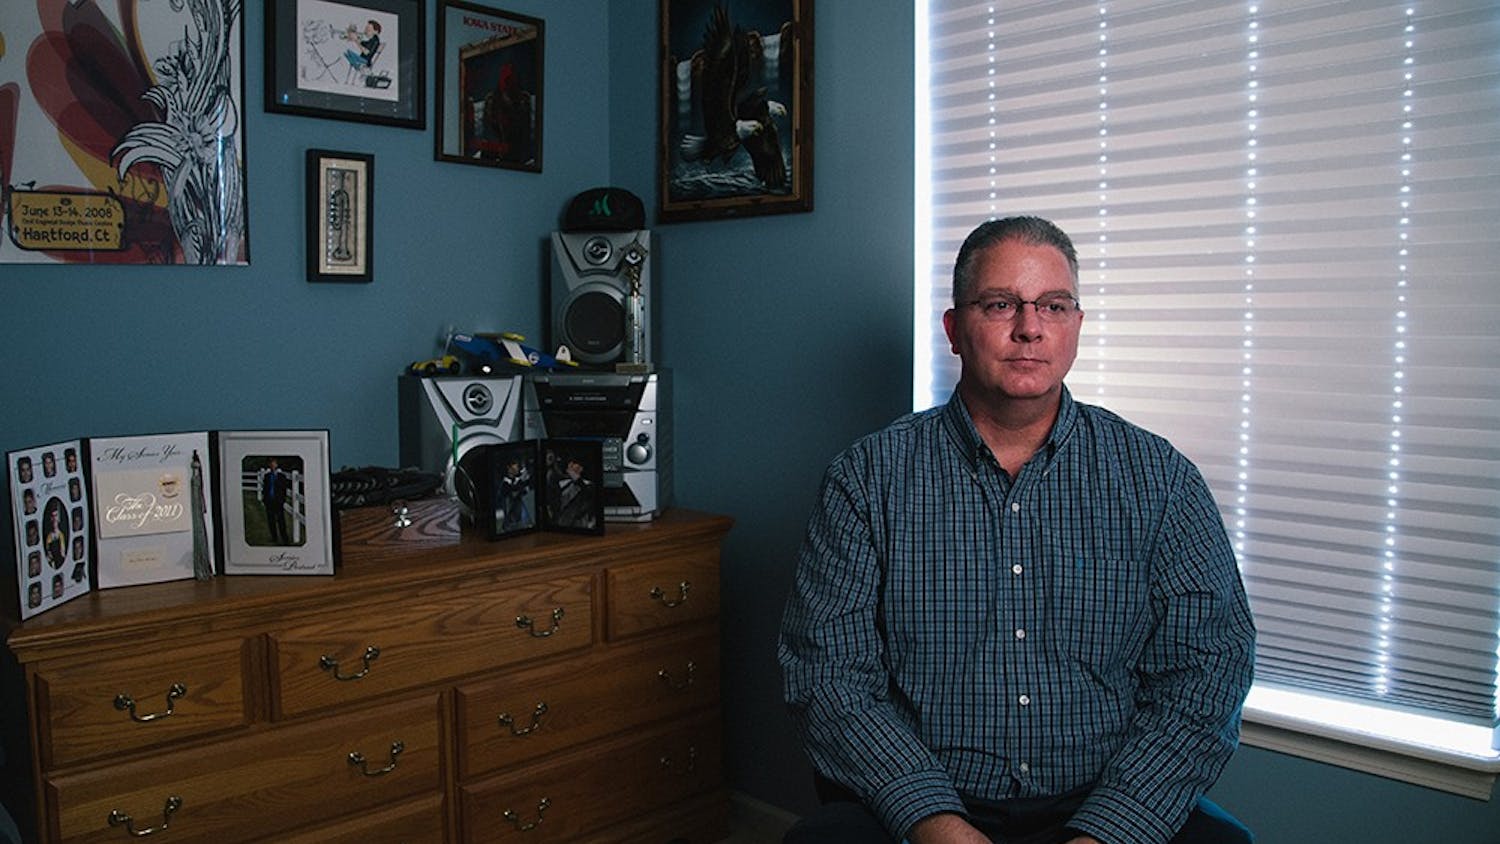 “We just have to accept this reality that I’m not going to see my son again in this life, and I just pray that I see him in the next life.” Bill MacLafferty, father of Brian MacLafferty, in his home in Indianapolis in the room that used to belong to Brian.Brian MacLafferty, 21, a senior majoring in neuroscience, shot himself in his apartment on Indiana Street in September 2014. 